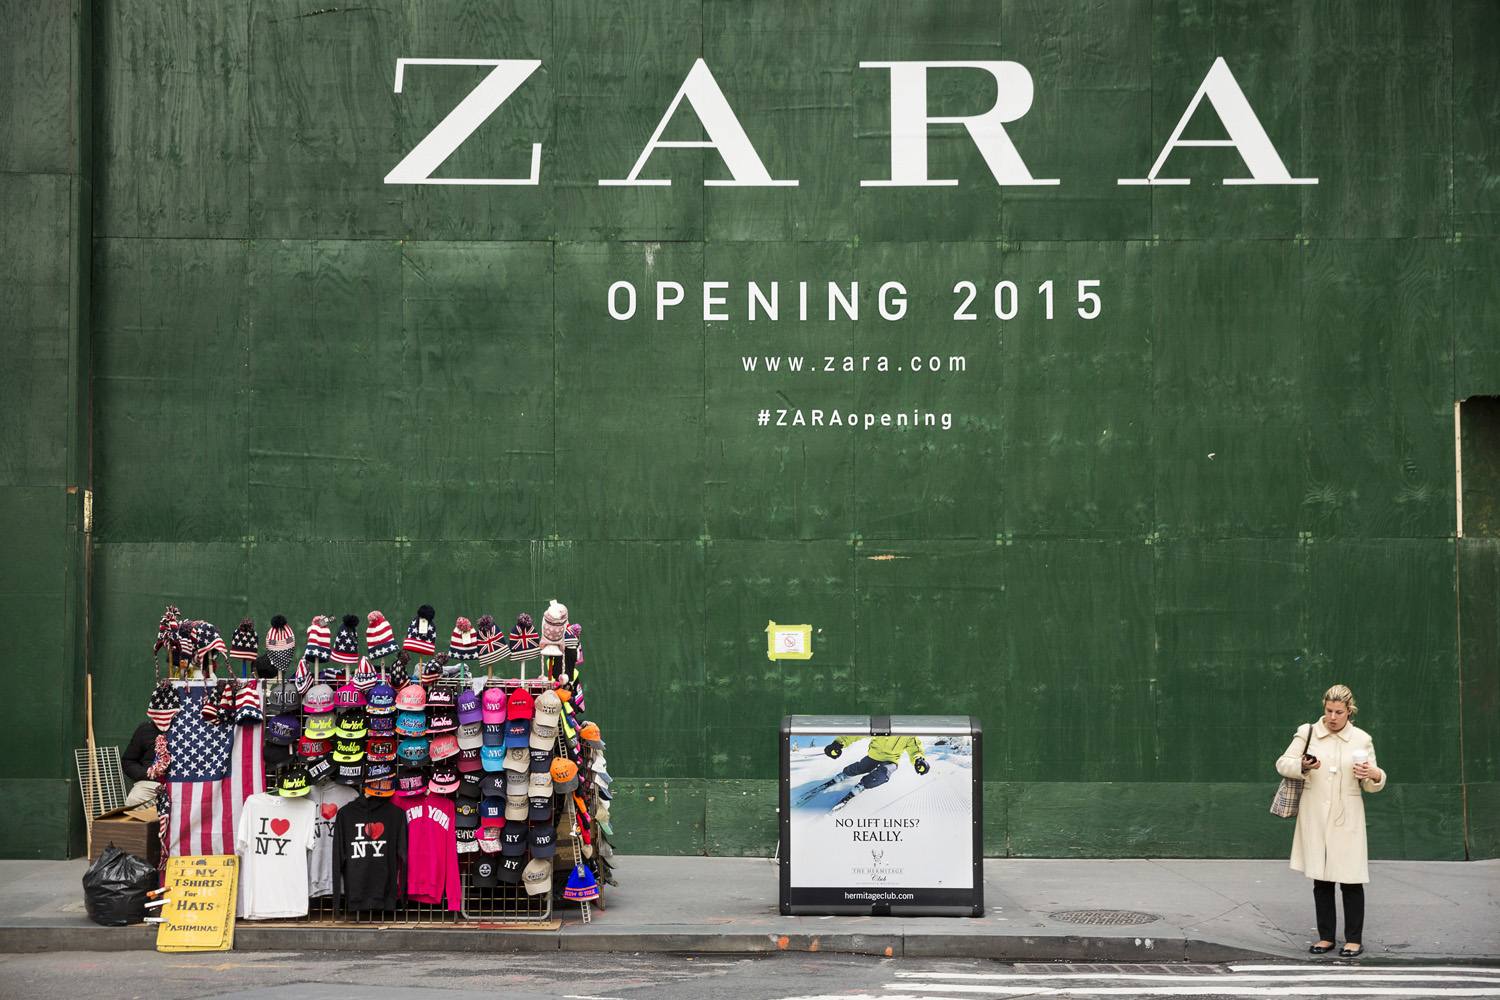 A woman checks her phone next to the construction site of a new Zara store in downtown Manhattan, New York, Dec 17, 2014.